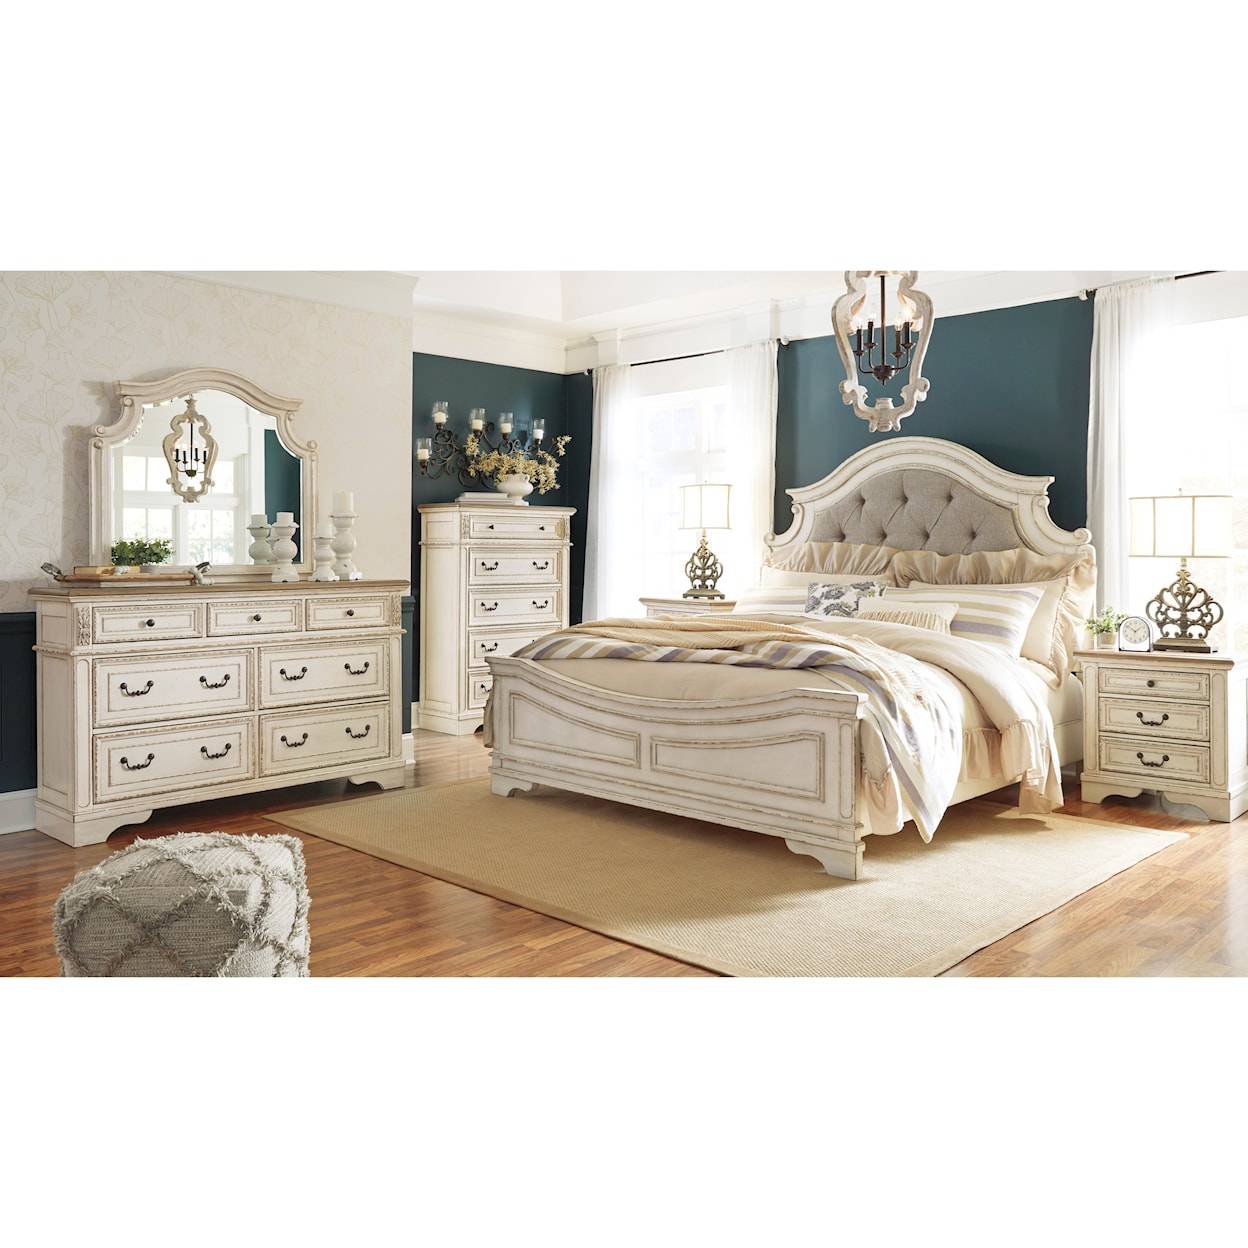 Signature Design by Ashley Realyn California King Bedroom Group